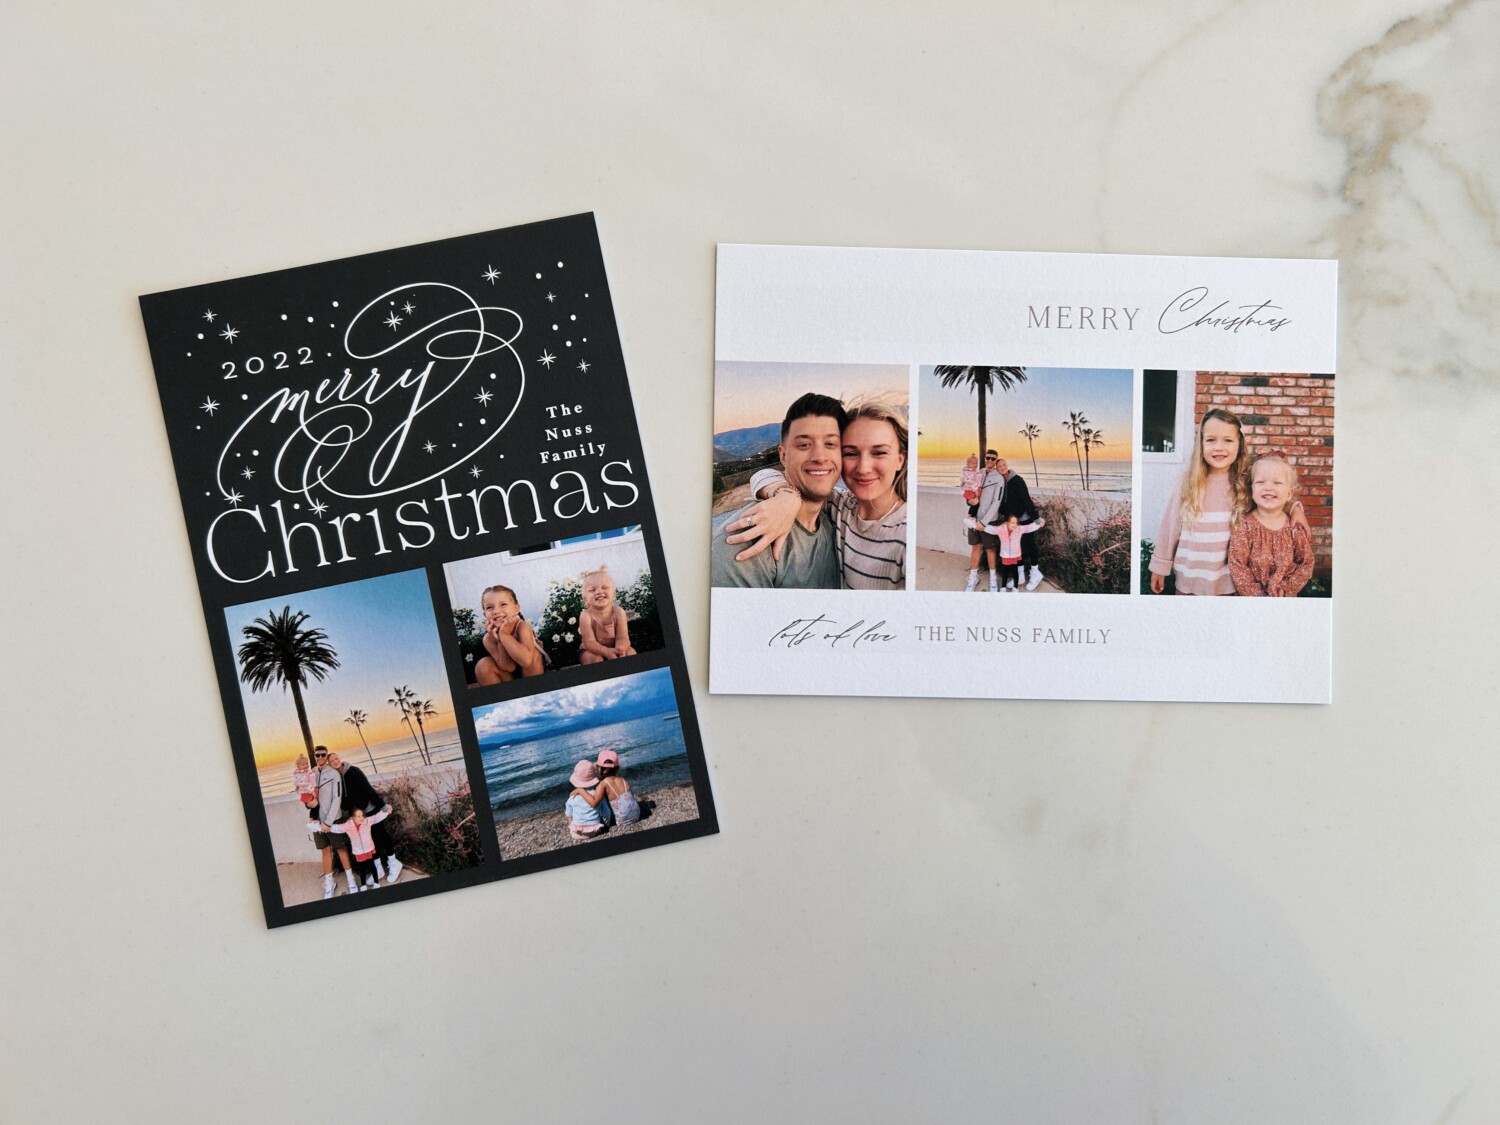 How To Make Fun Holiday Cards with Basic Invite